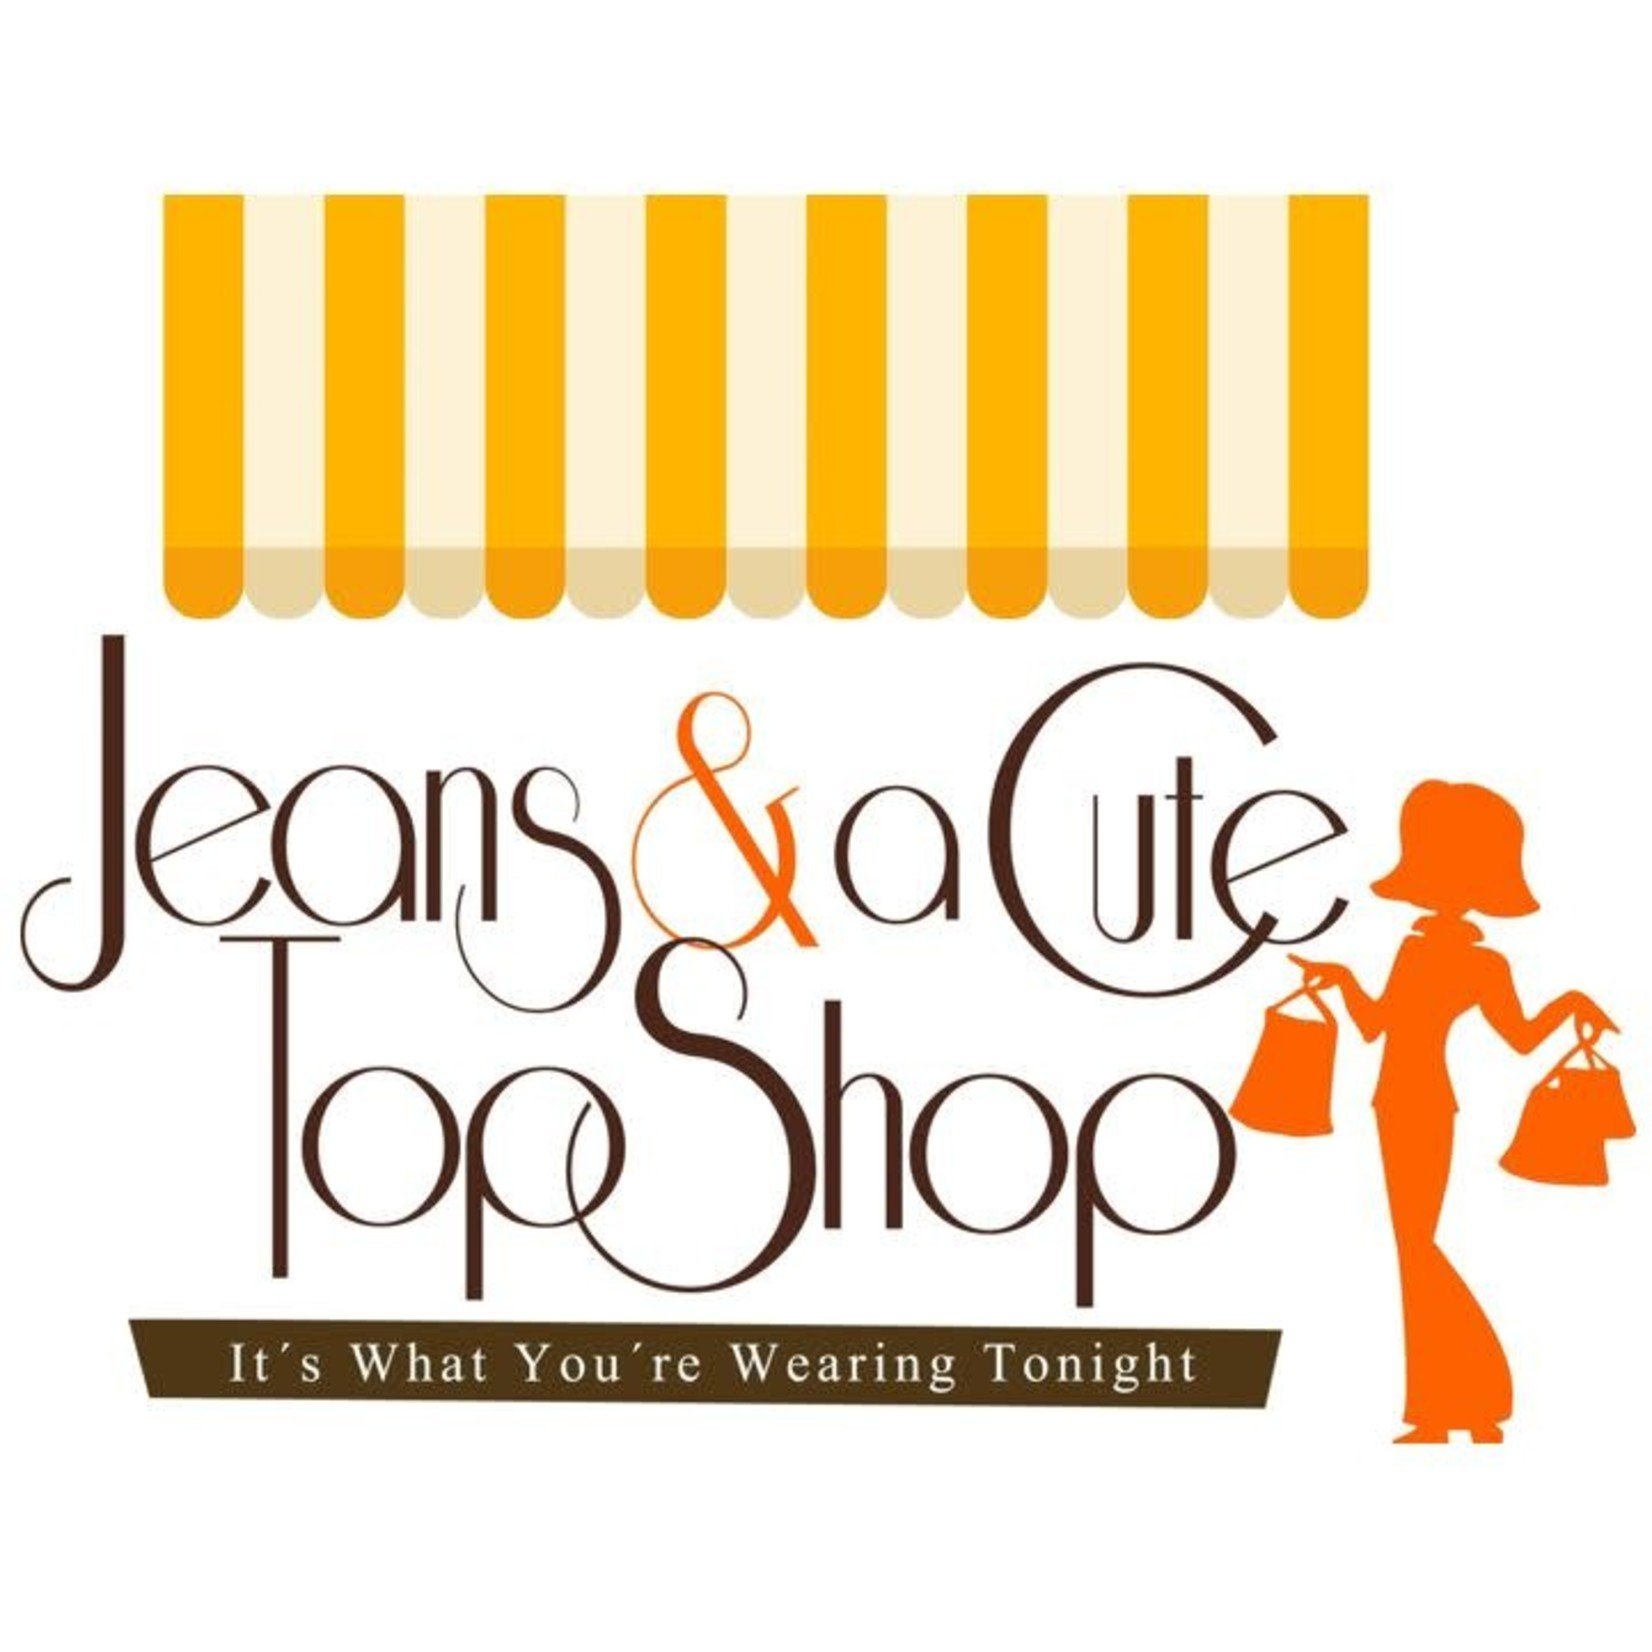 Jeans and a Cute Top Shop-Various Jeans and a Cute Top Shop-Various  $20.00 Merchandise Certificate